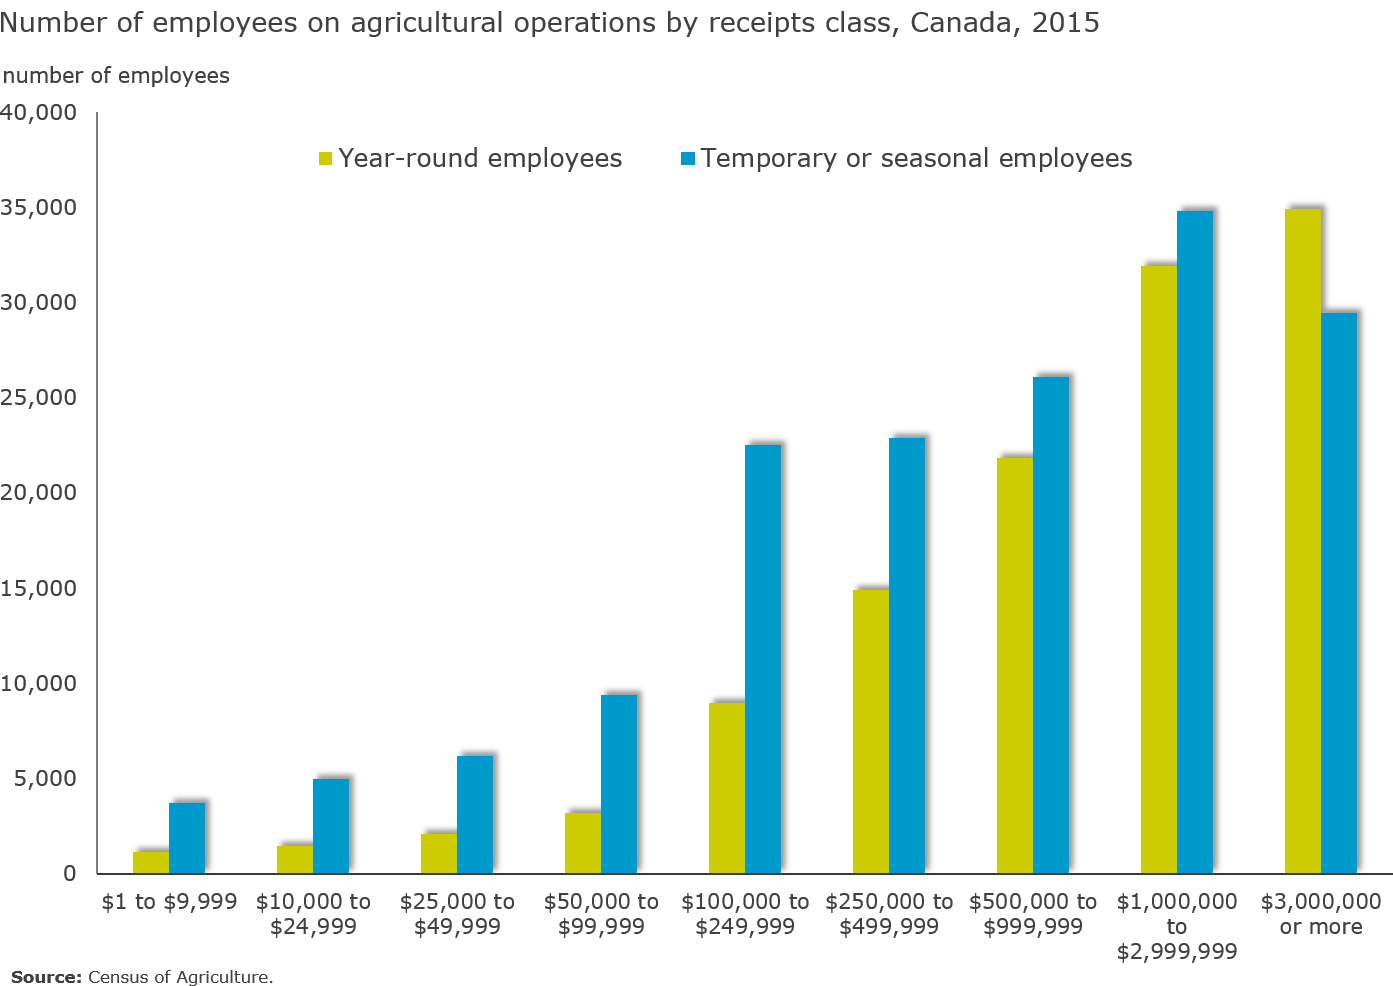 Chart 9 - Number of employees on agricultural operations by receipts class, Canada, 2015